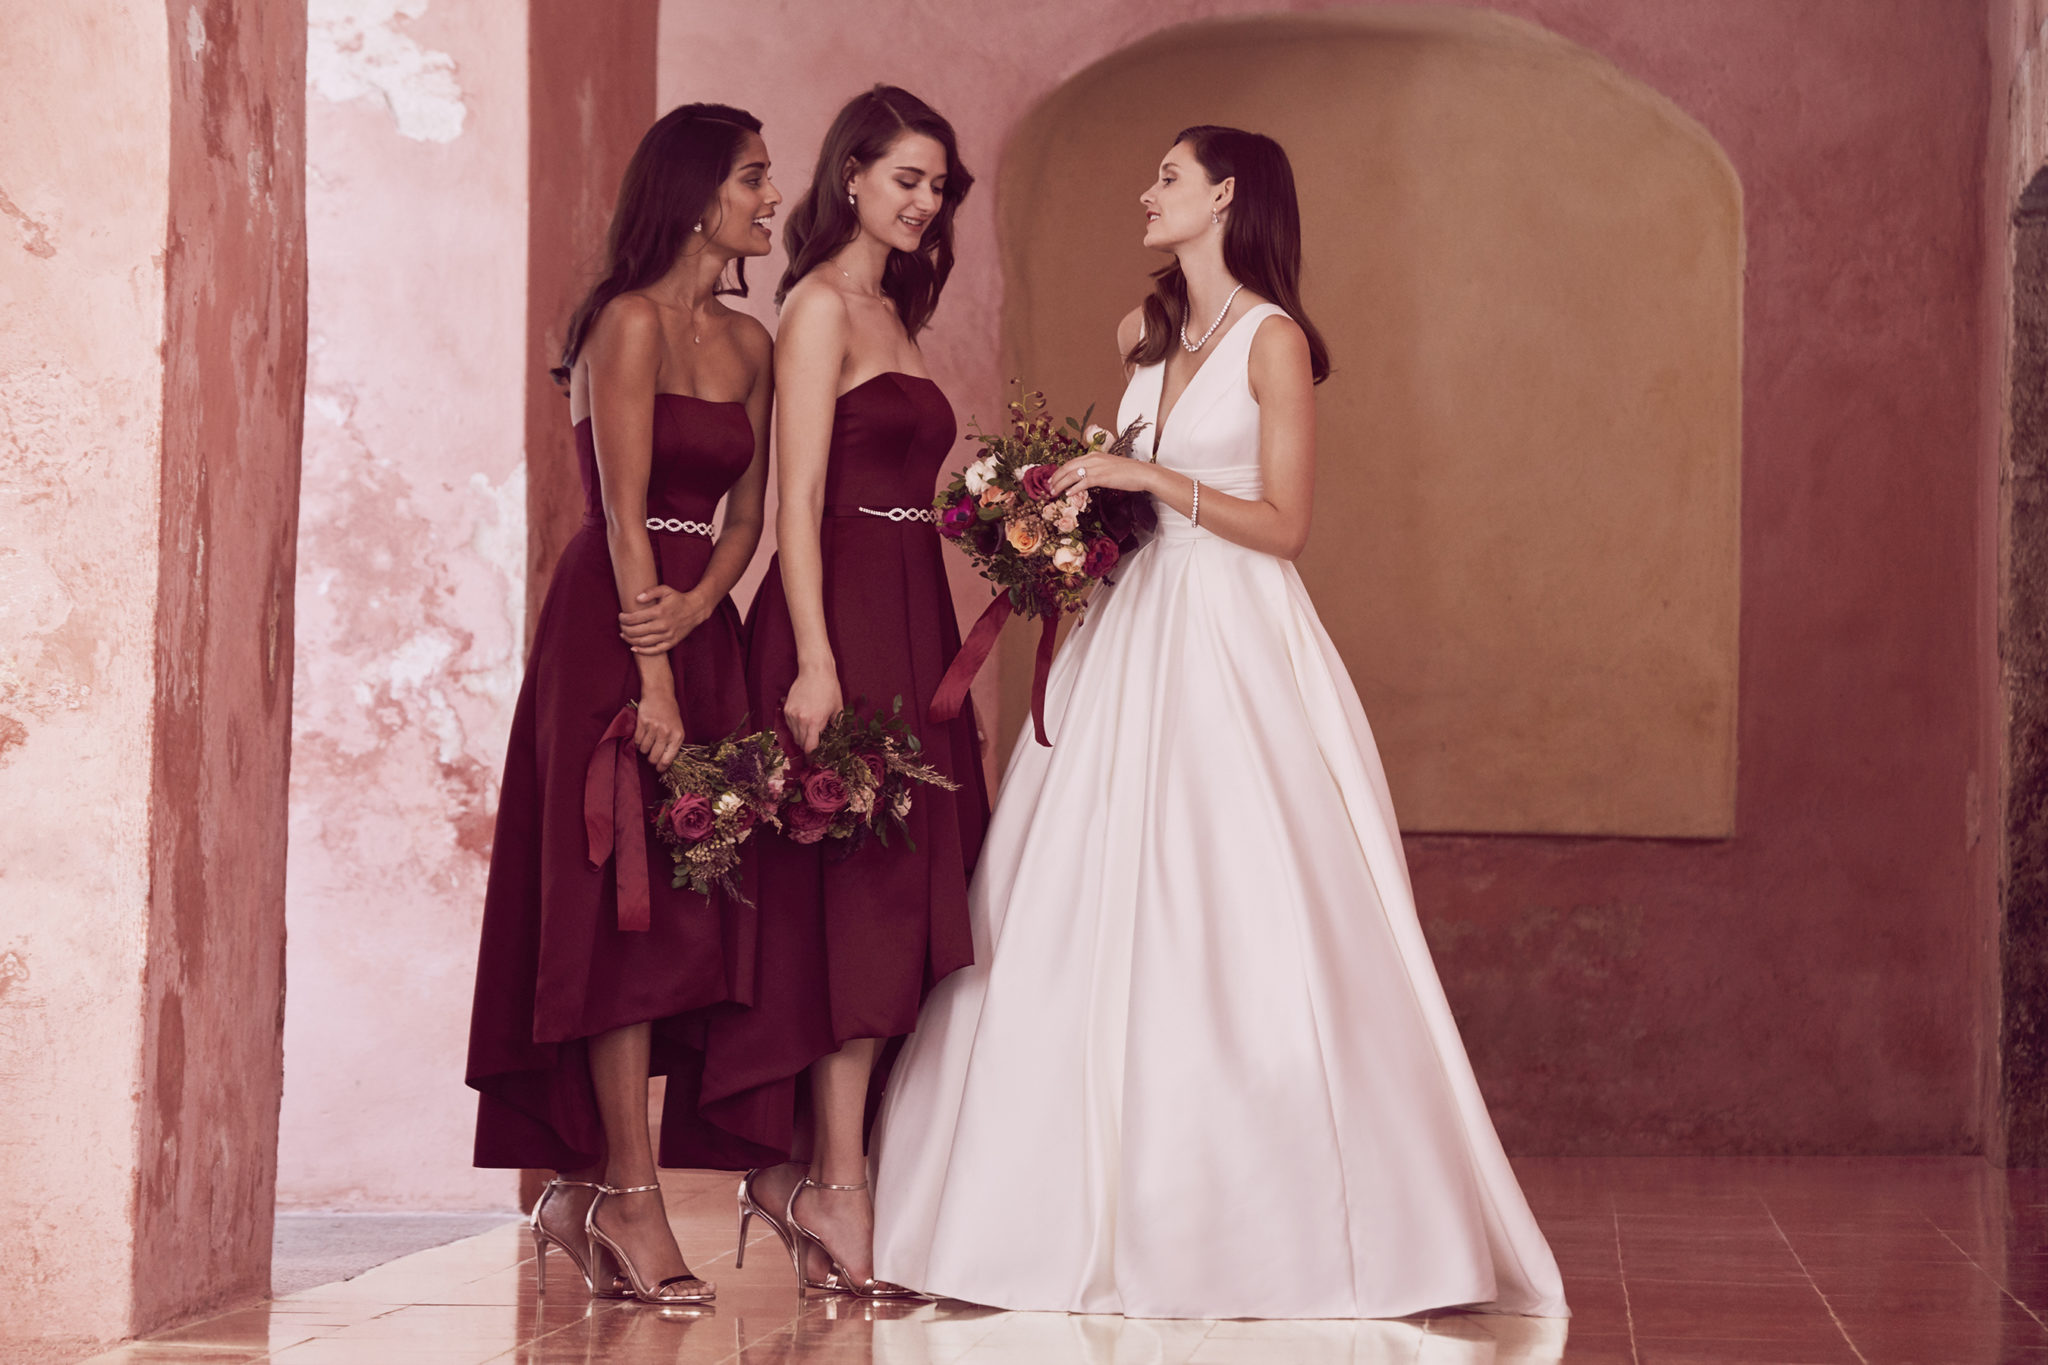 Classically cool bridesmaids and bride featuring David's Bridal Collection Fall 2017. See more on the David's Bridal blog www.davidsbridal.com/blog.